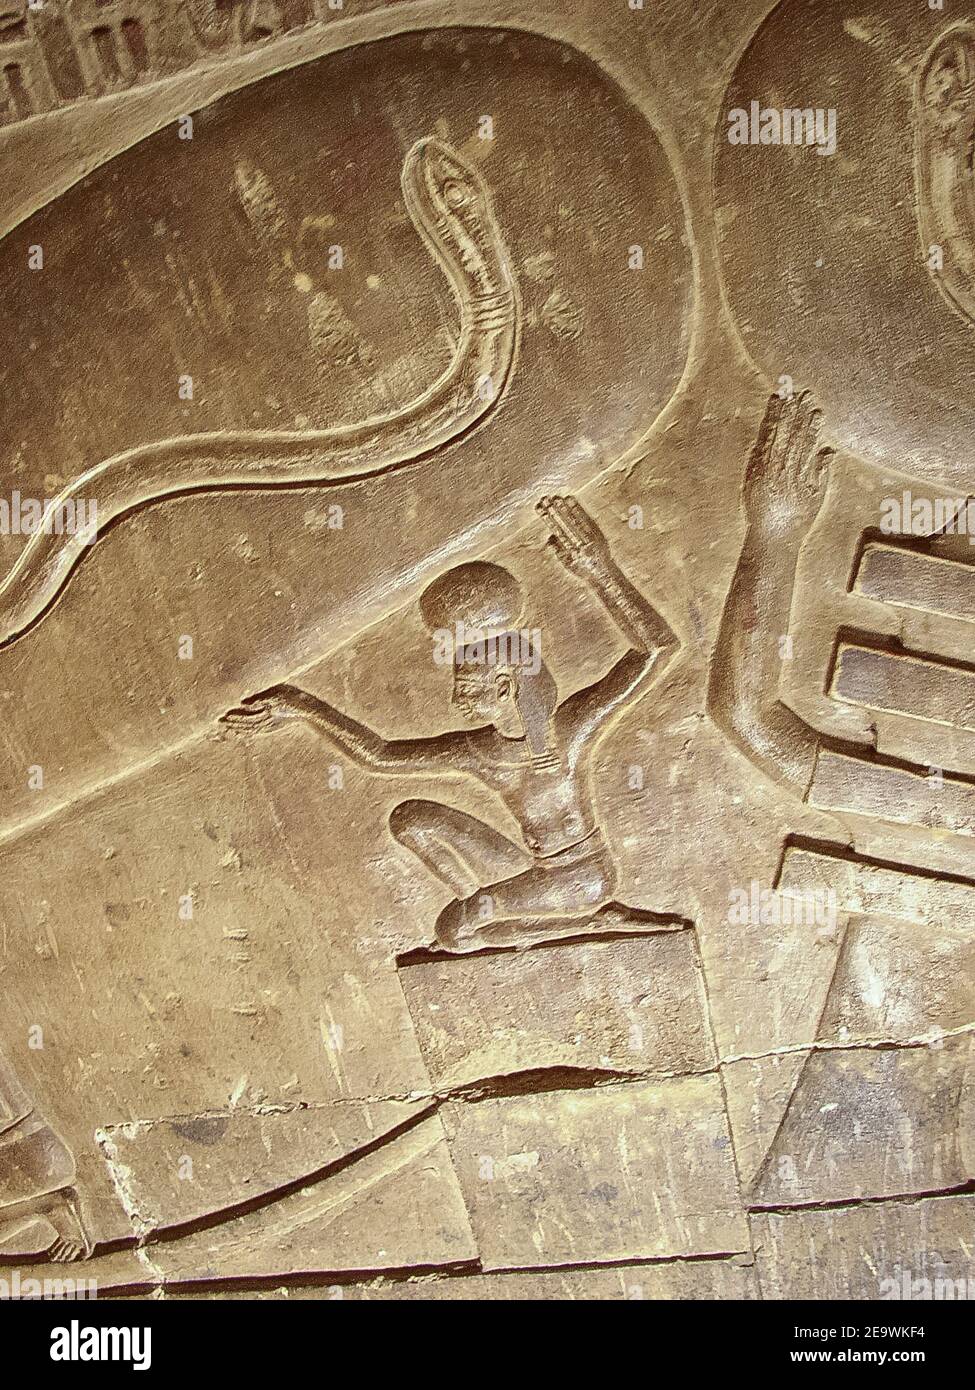 Egypt, Dendera temple, in a room, strange scene called "light bulb", sometimes (wrongly) seen as a proof that Ancient Egyptians knew electricity. Stock Photo